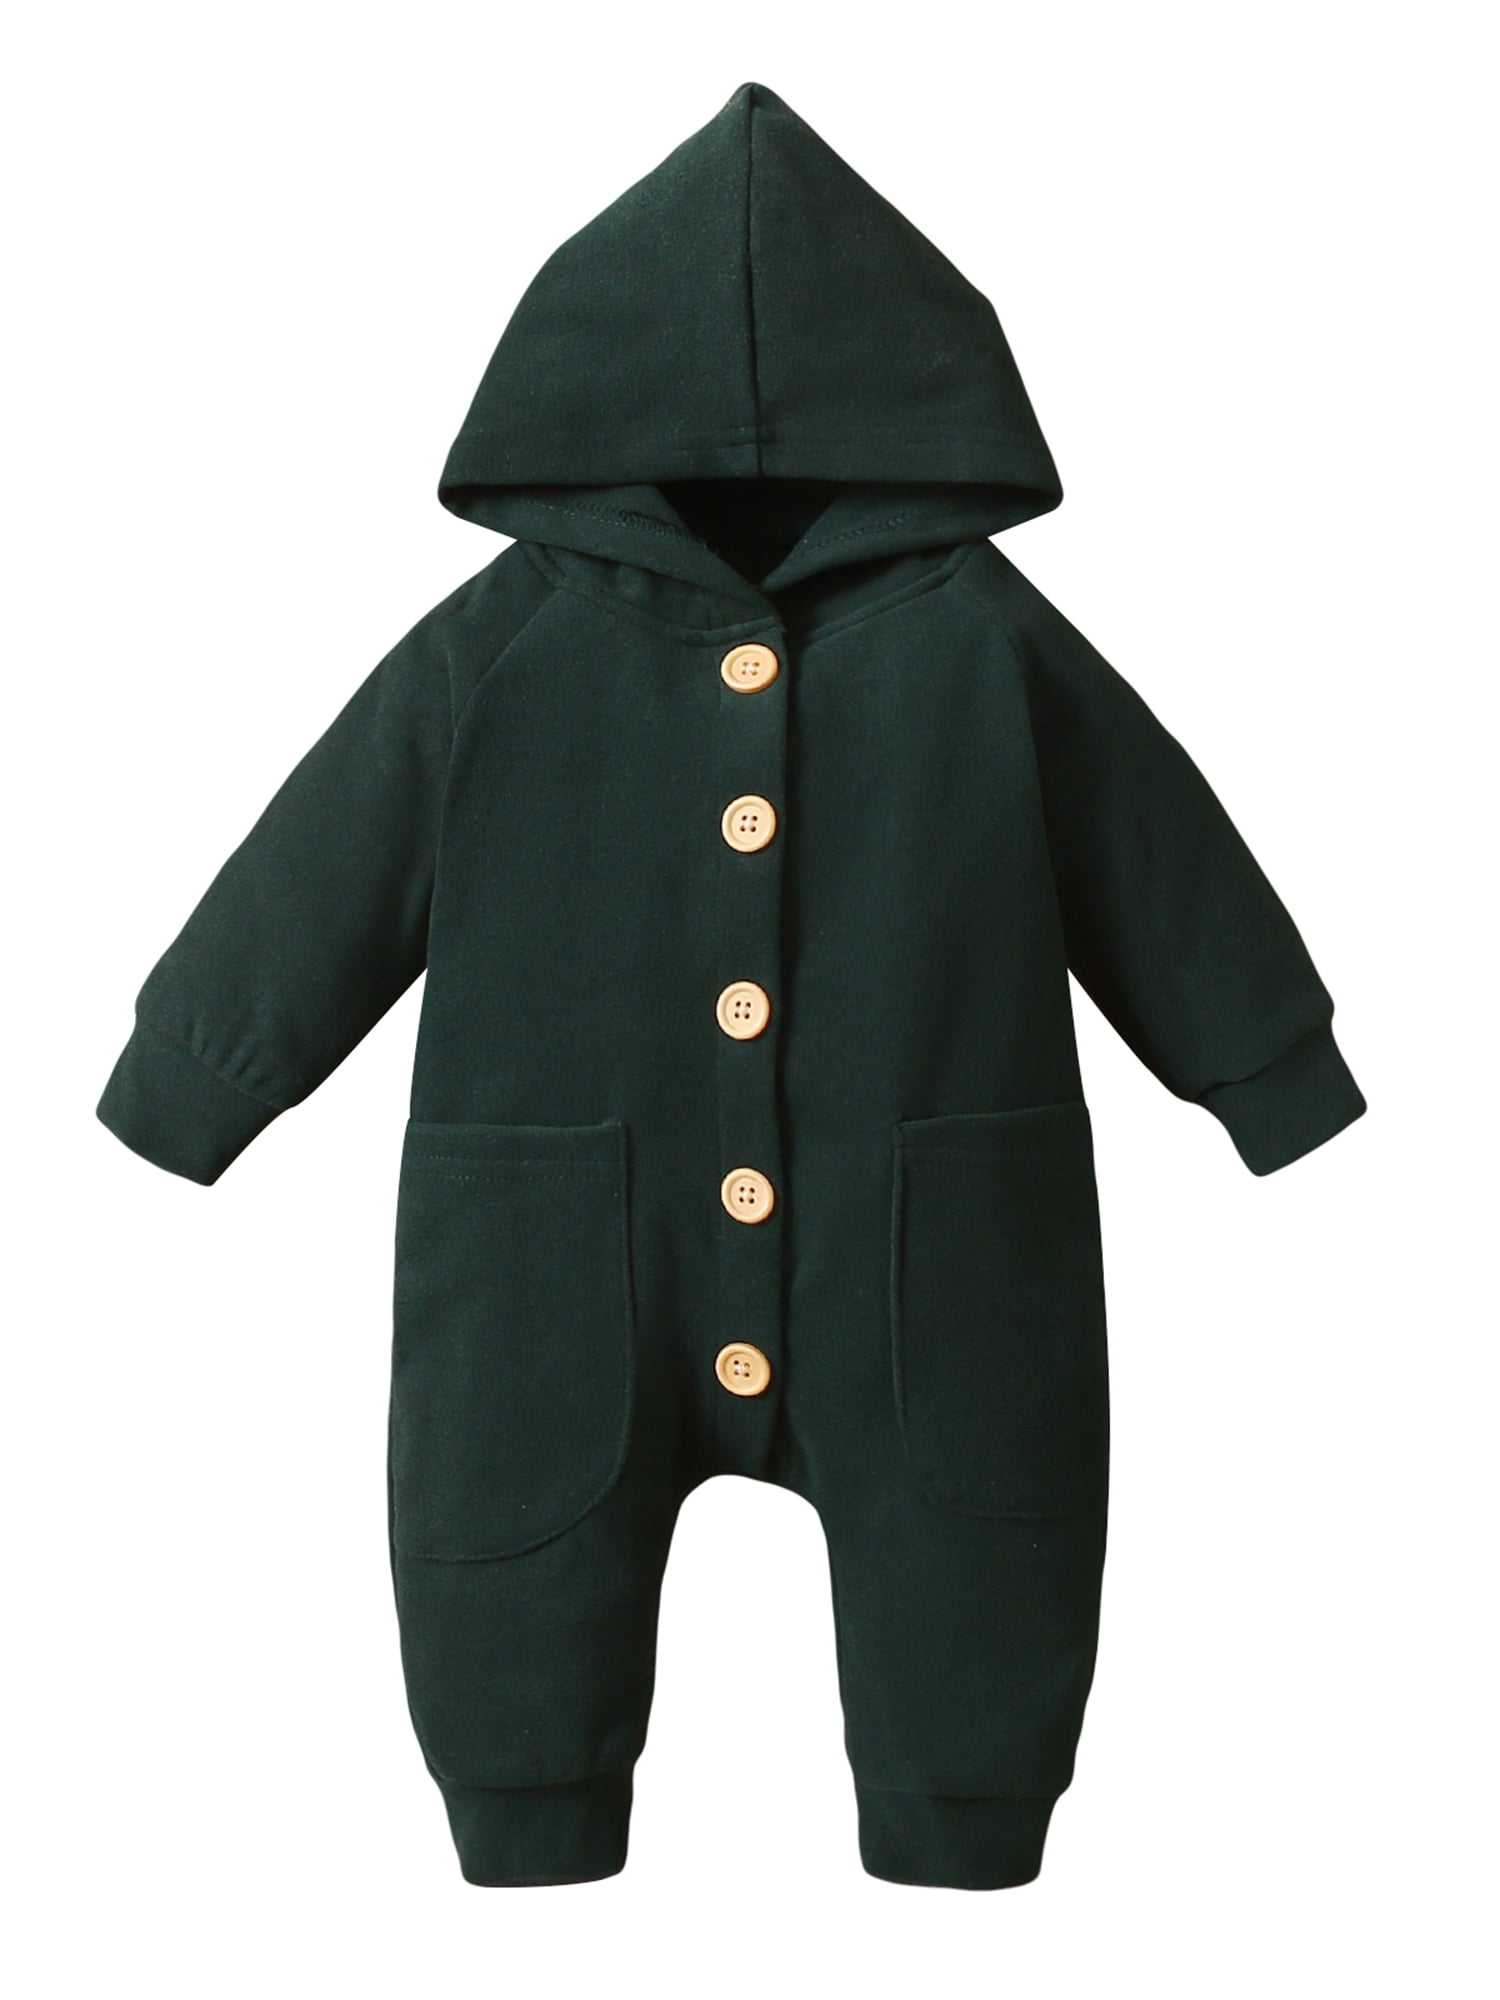 Winter Warm Baby Long Sleeve Boy Girls Hooded Romper Jumpsuit Clothes One Piece 